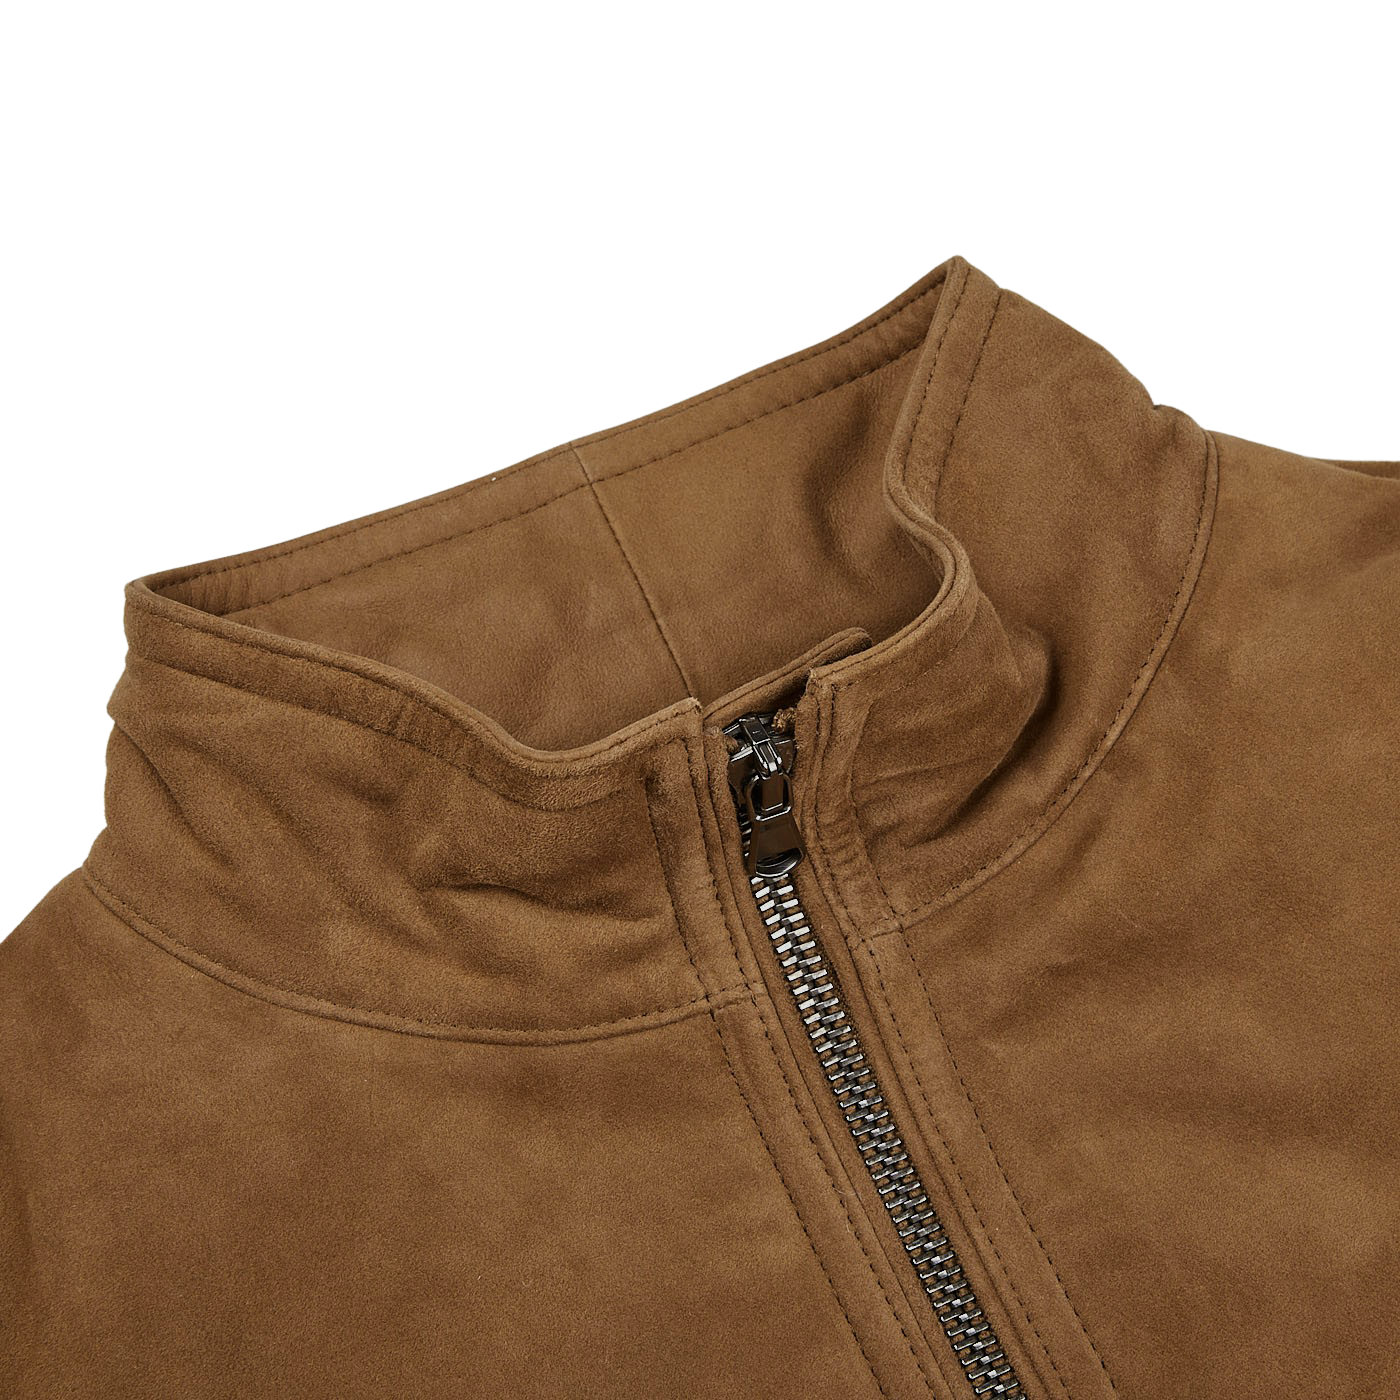 A close up of a Werner Christ Tobacco Brown Suede Leather Alberto Gilet.